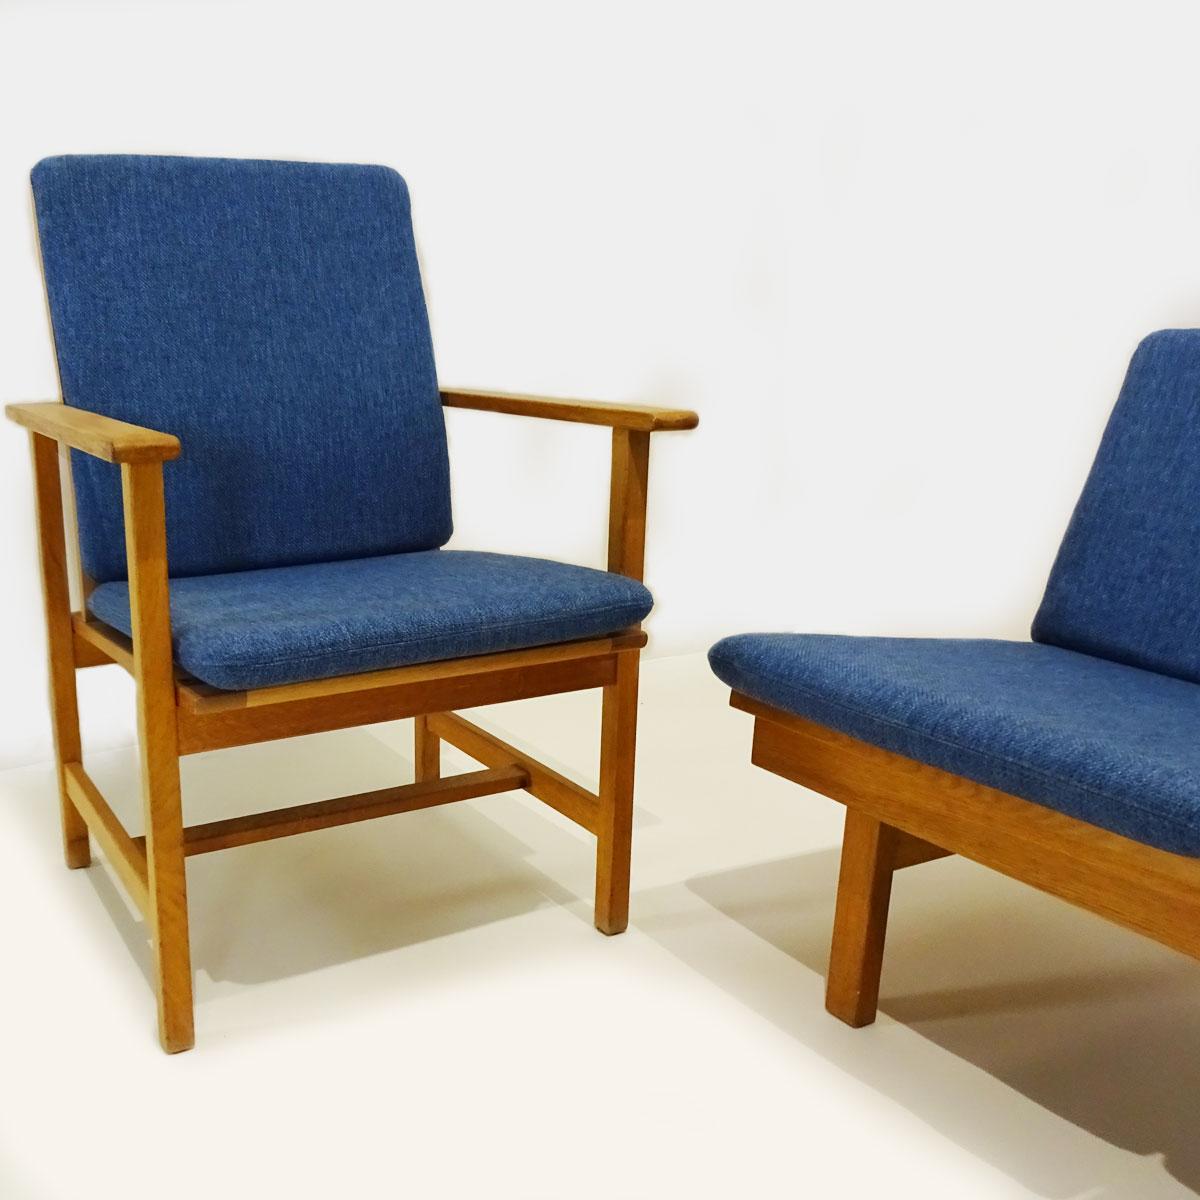 Mid-20th Century Danish Midcentury Børge Mogensen 4 Seater Oak Bench Sofa and Two Armchairs For Sale